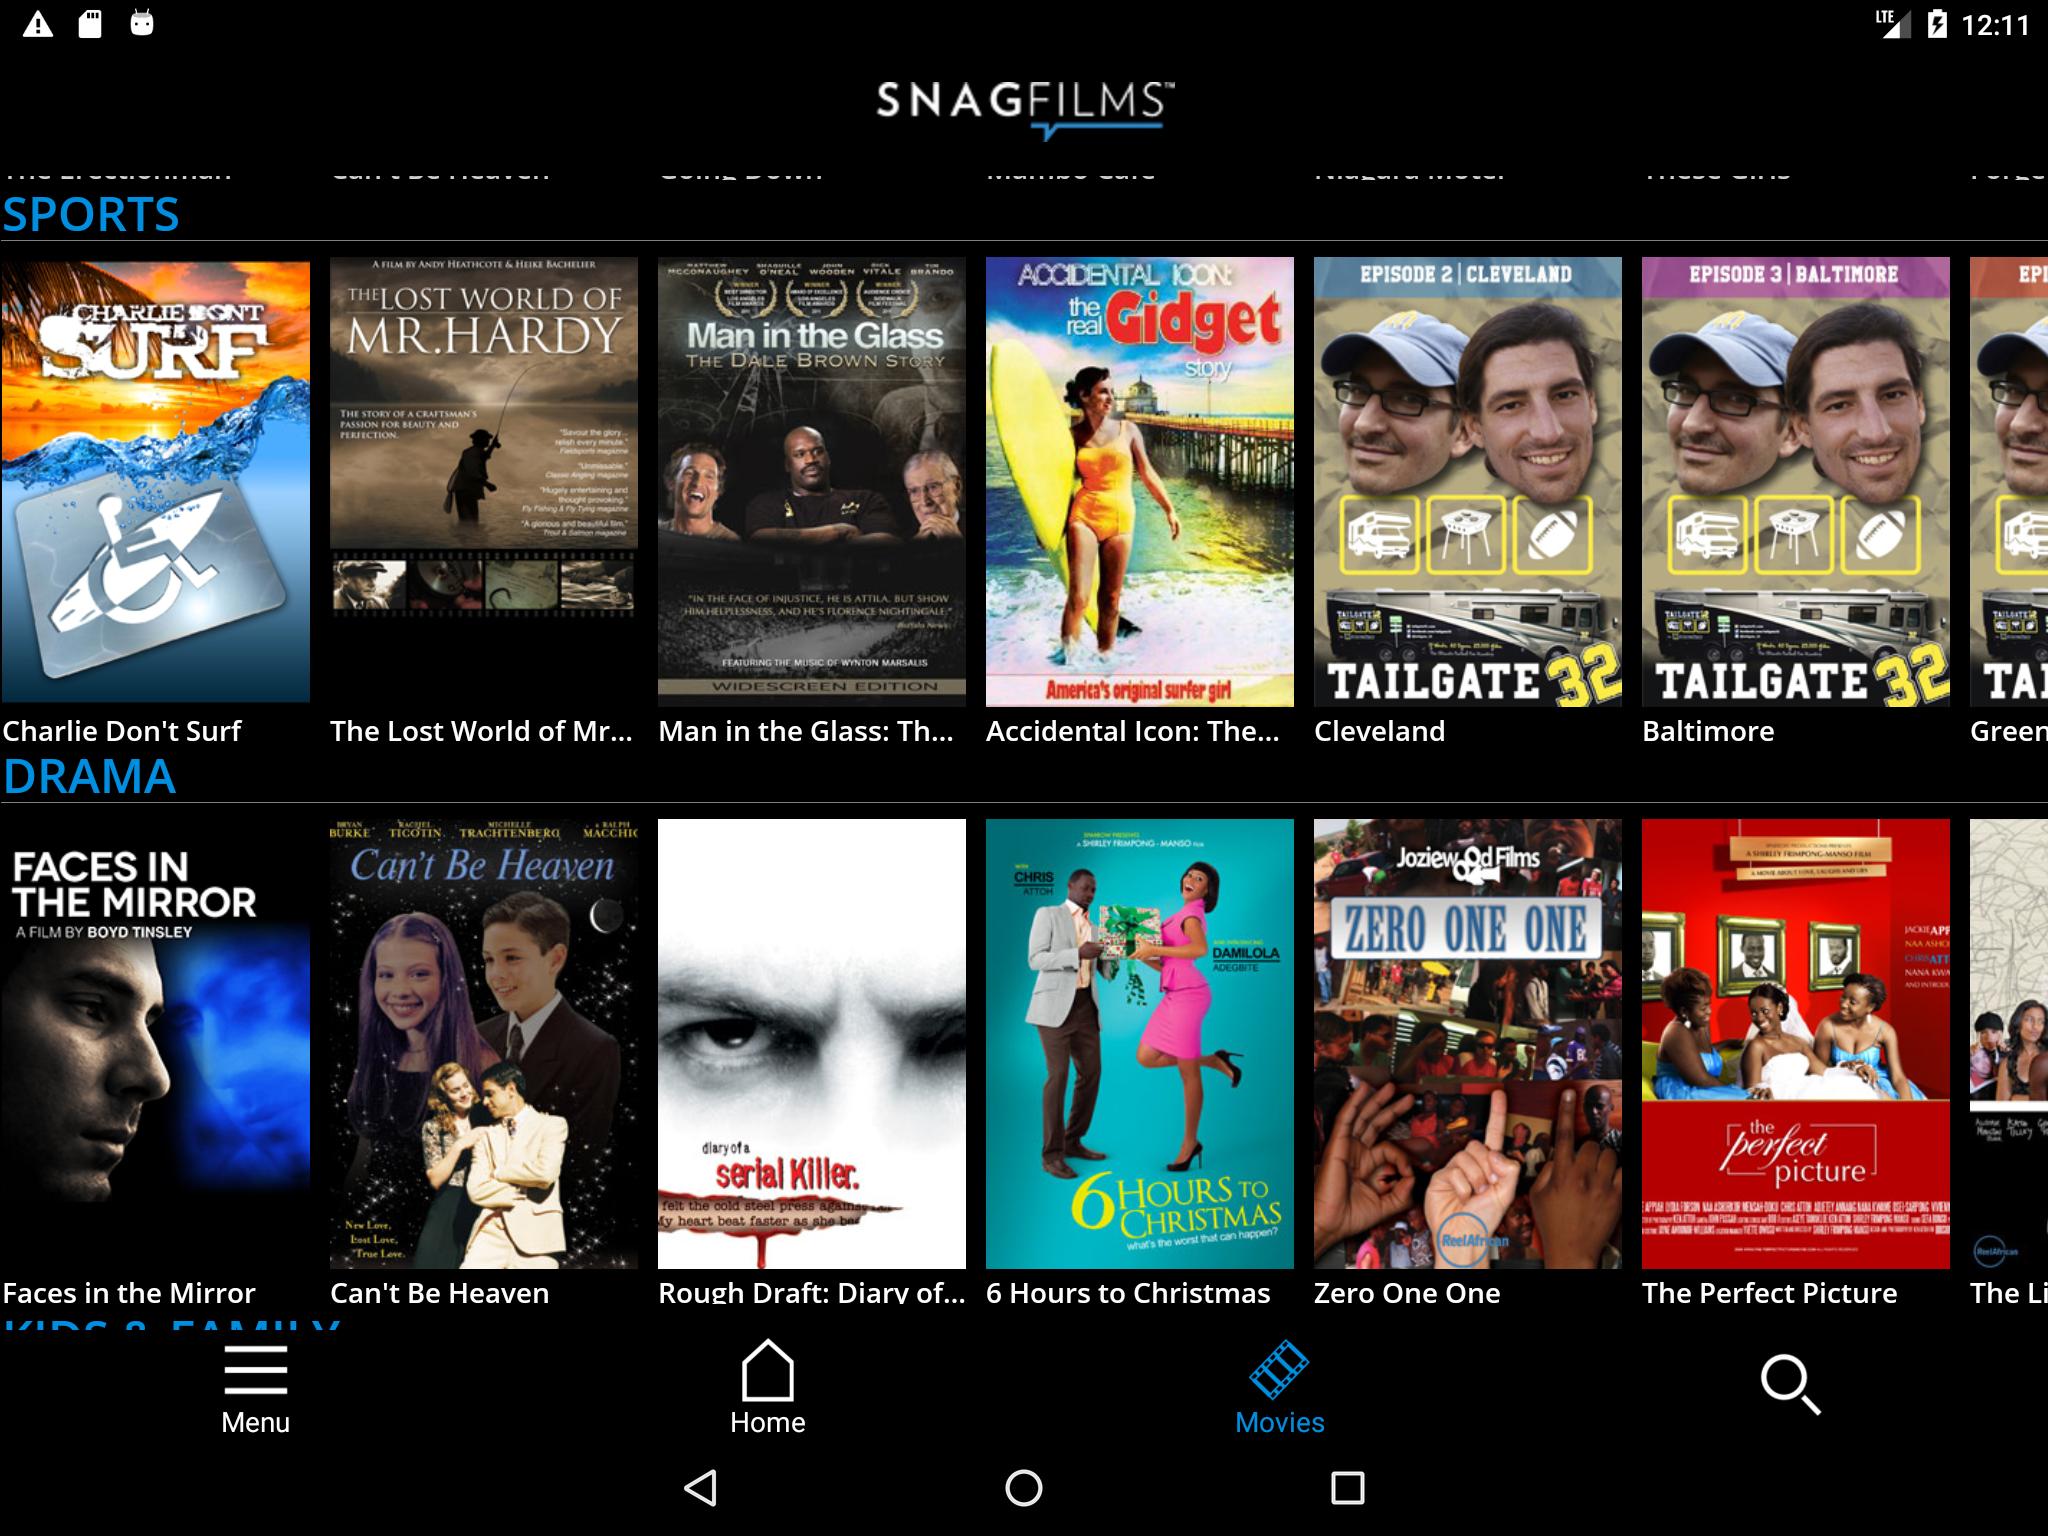 36 HQ Photos Watch Free Movie Apps Apk : 12 Free Movie And Tv Apps For Legal Streaming In 2019